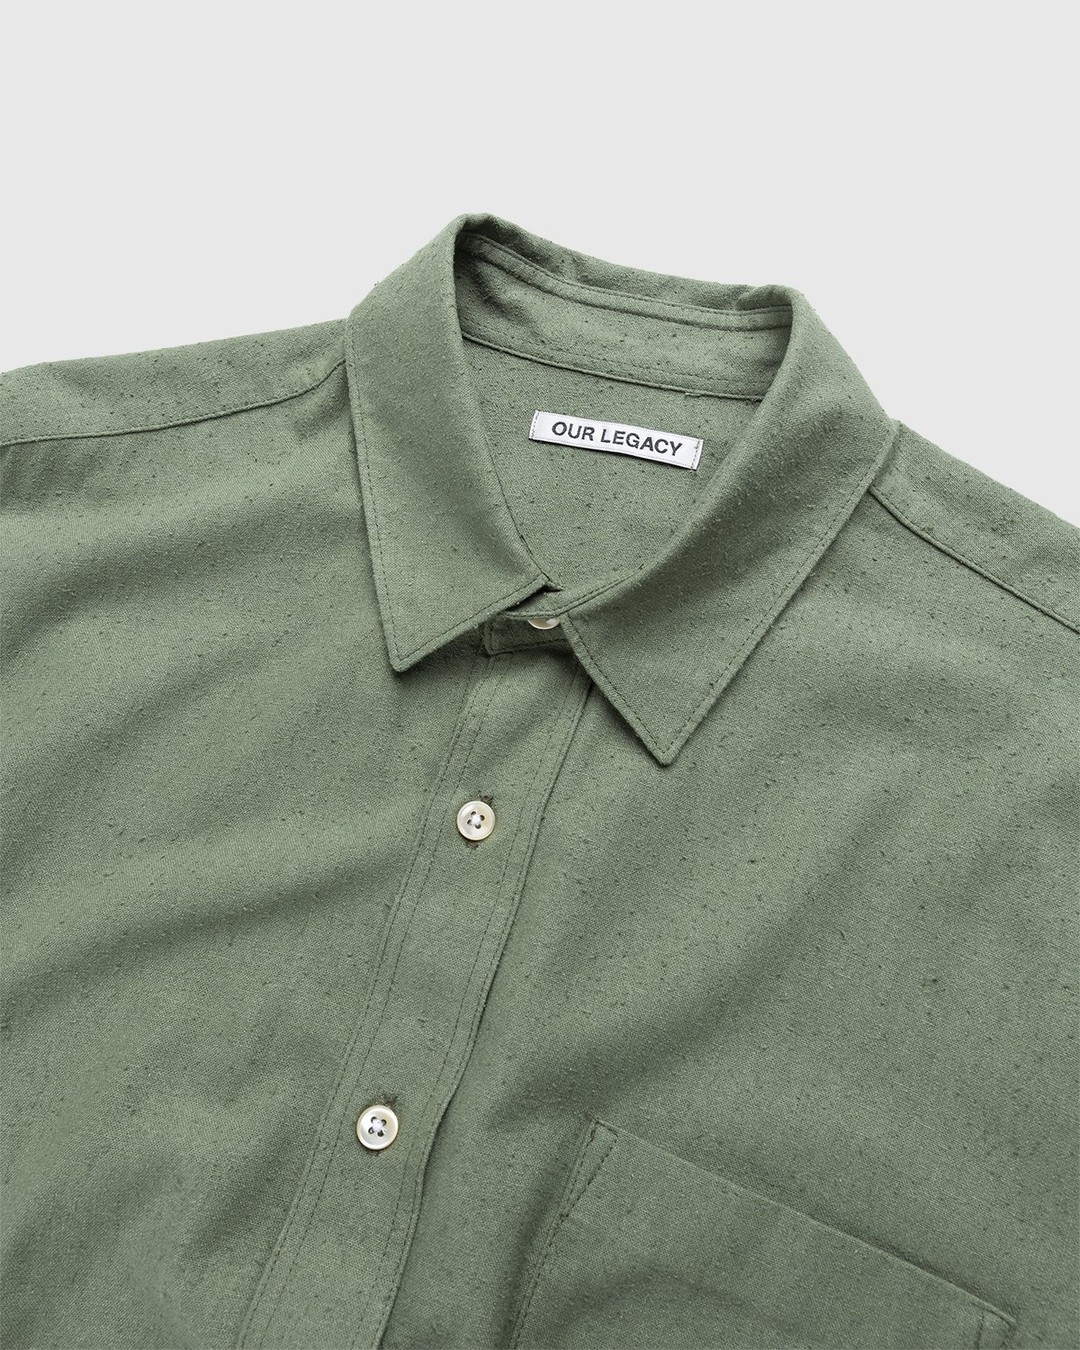 Our Legacy – Classic Shirt Ivy Green - Shirts - Green - Image 6